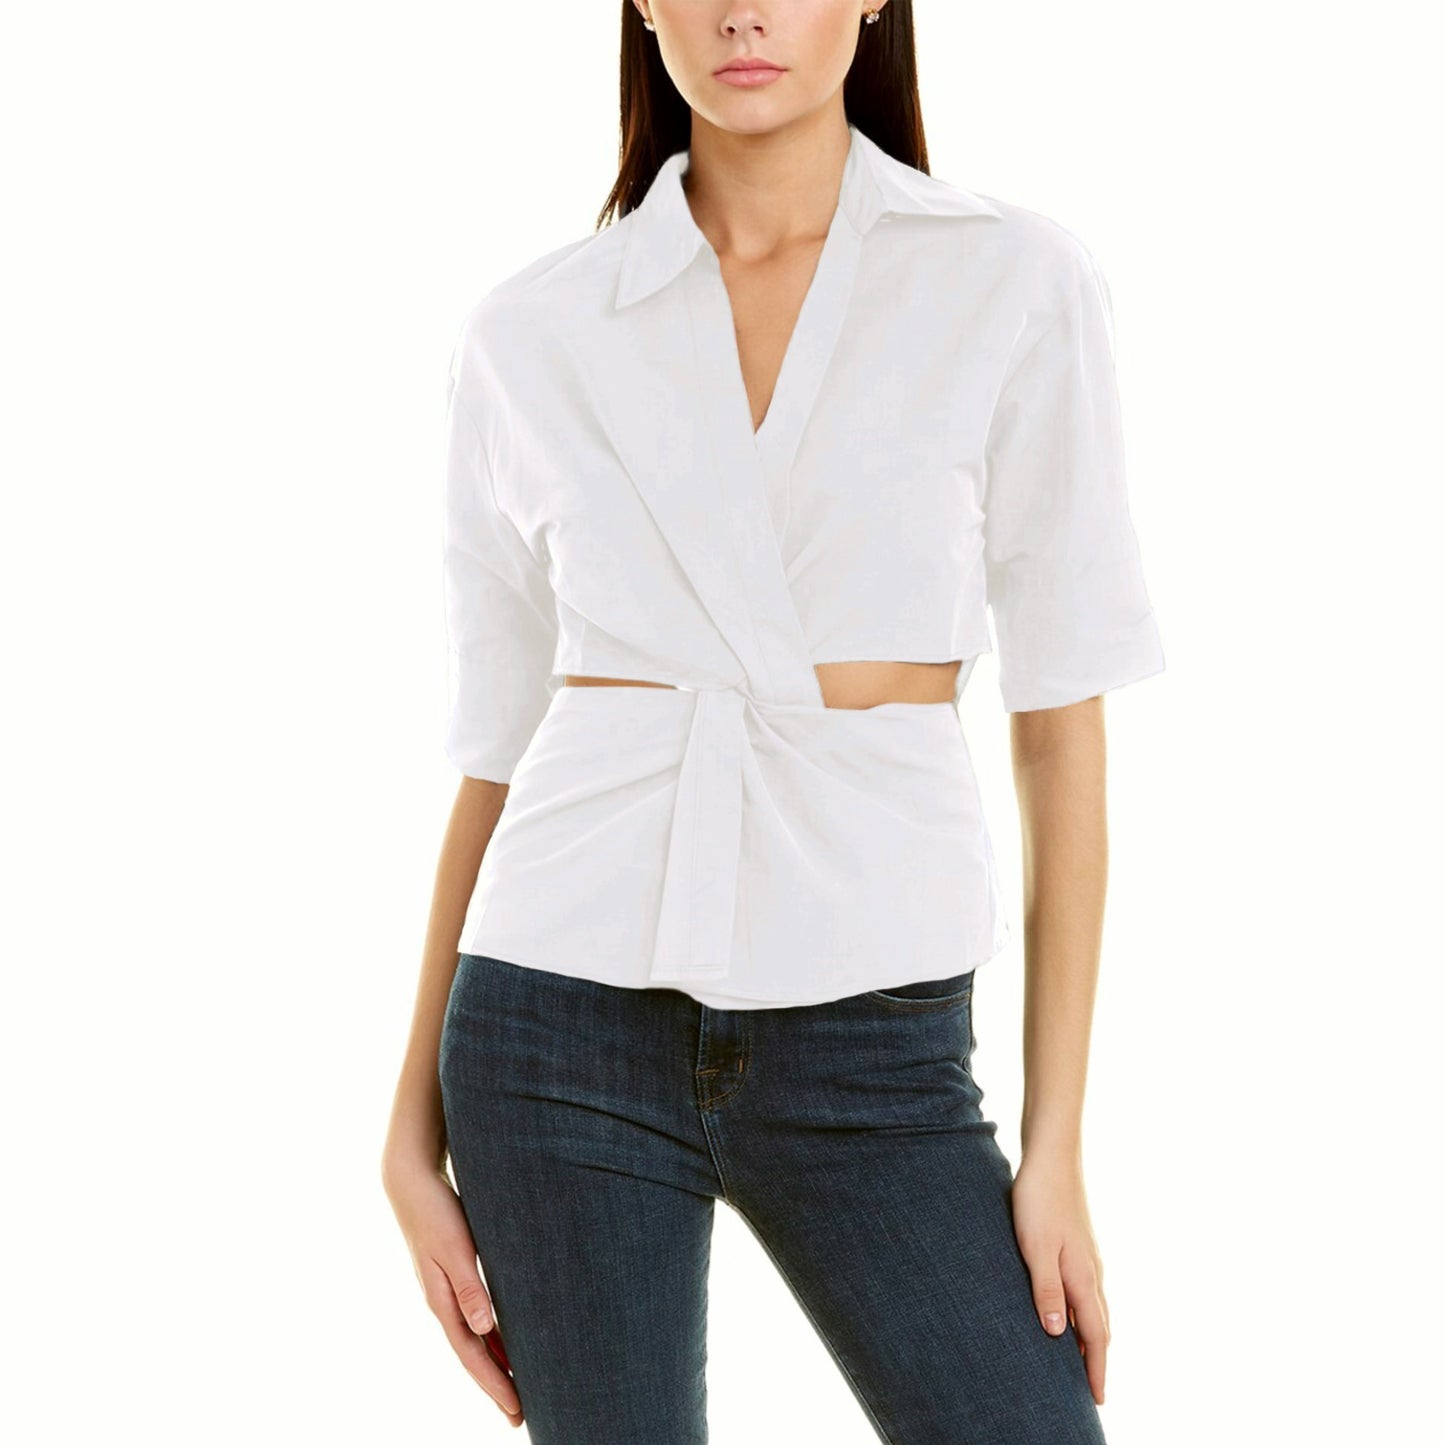 Gracia Collared Cut Out Twisting Point Blouse Top